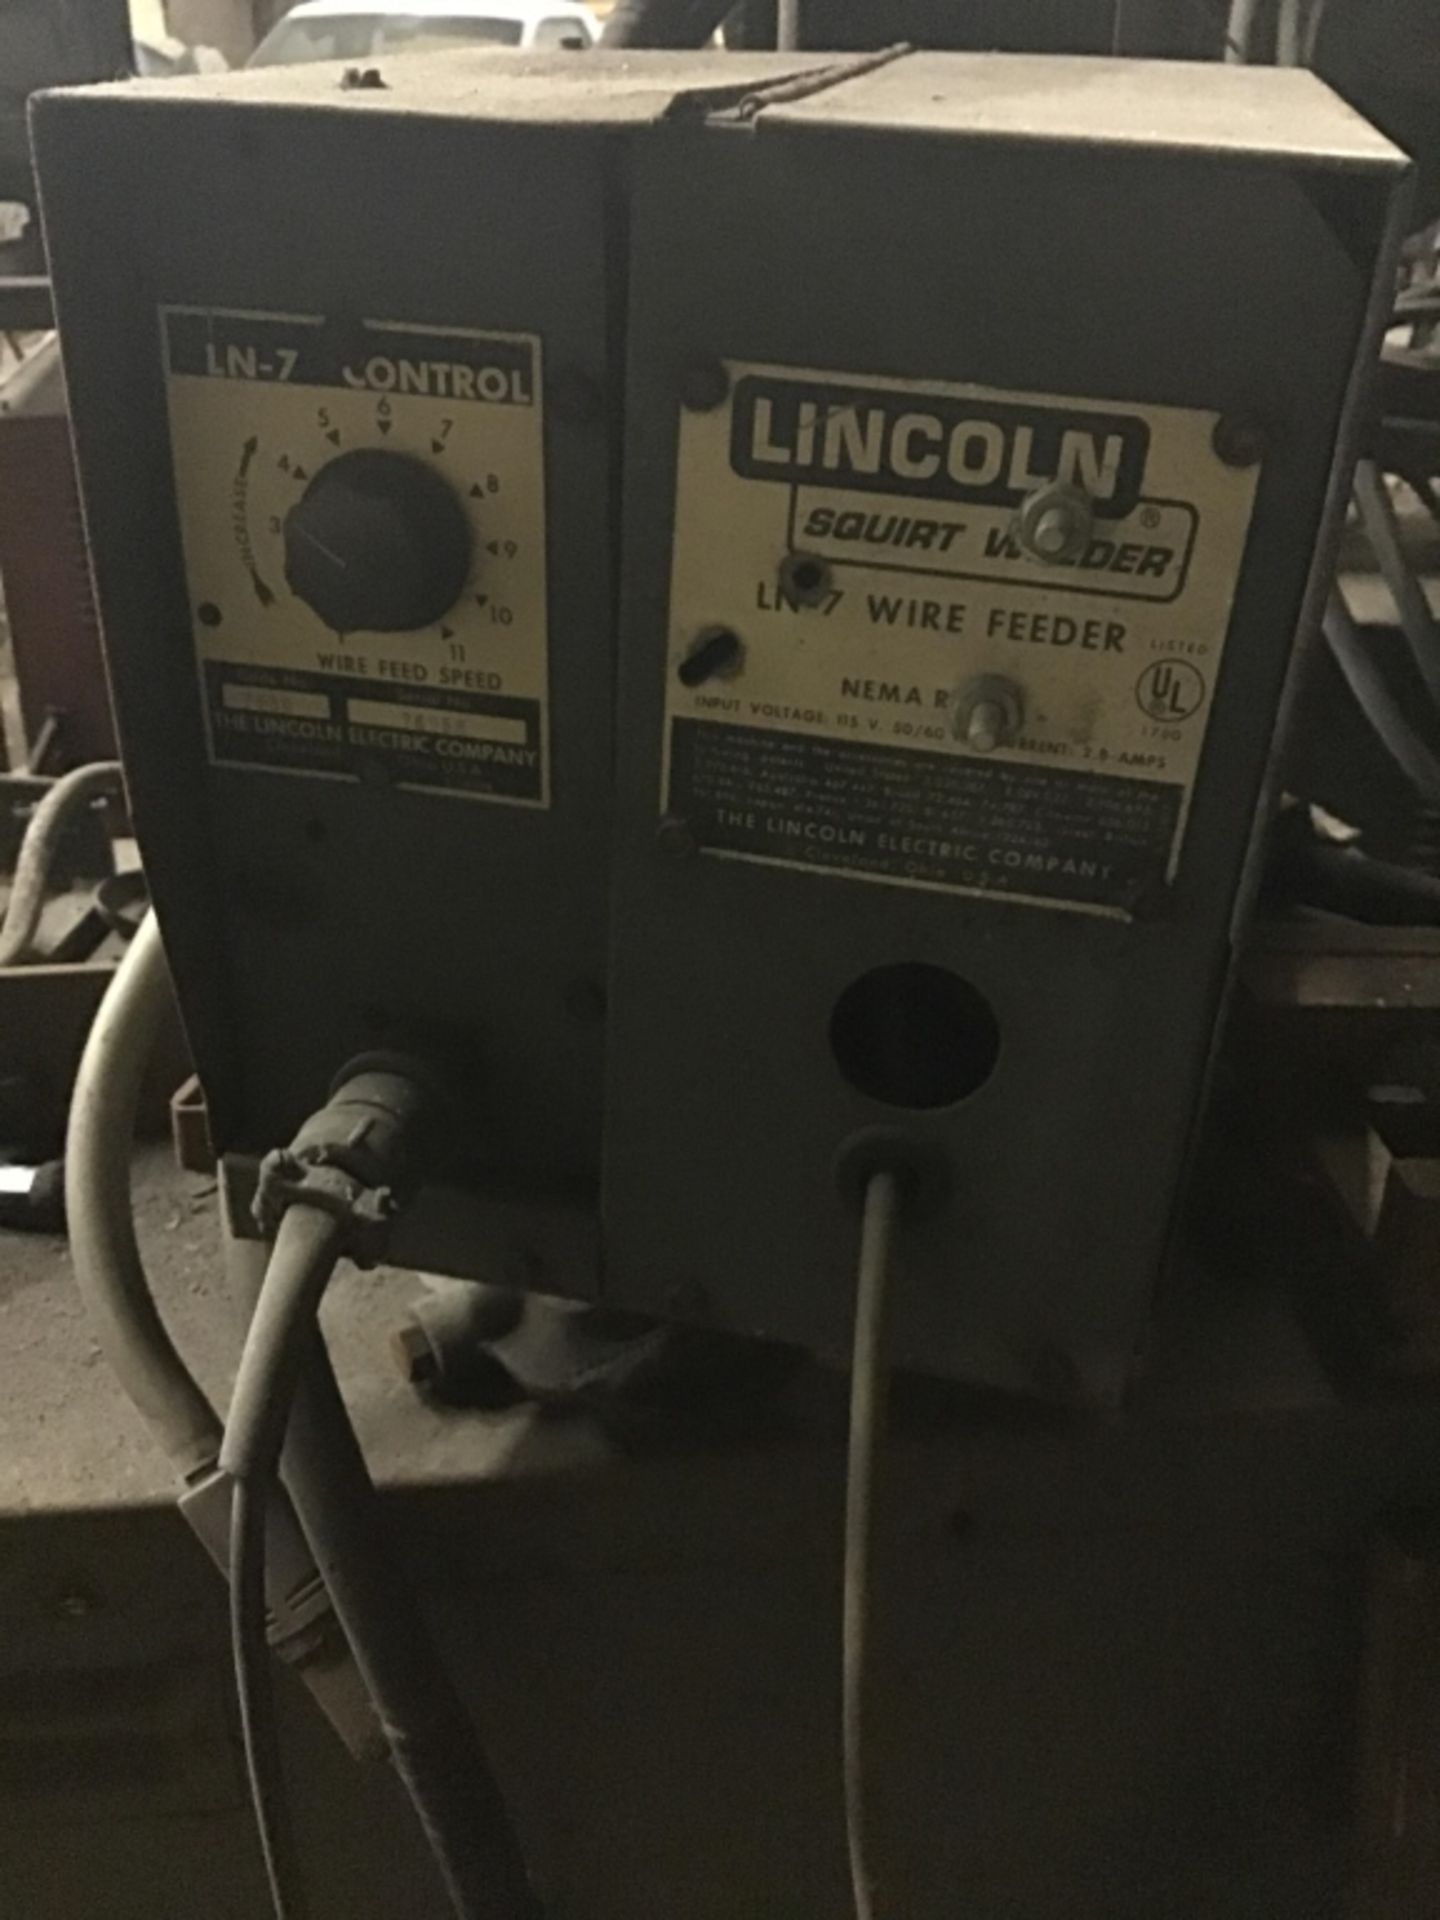 Lincoln R3S-600 constant voltage DC power source with LN-7 wire feeder tweco mig gun - Image 5 of 5